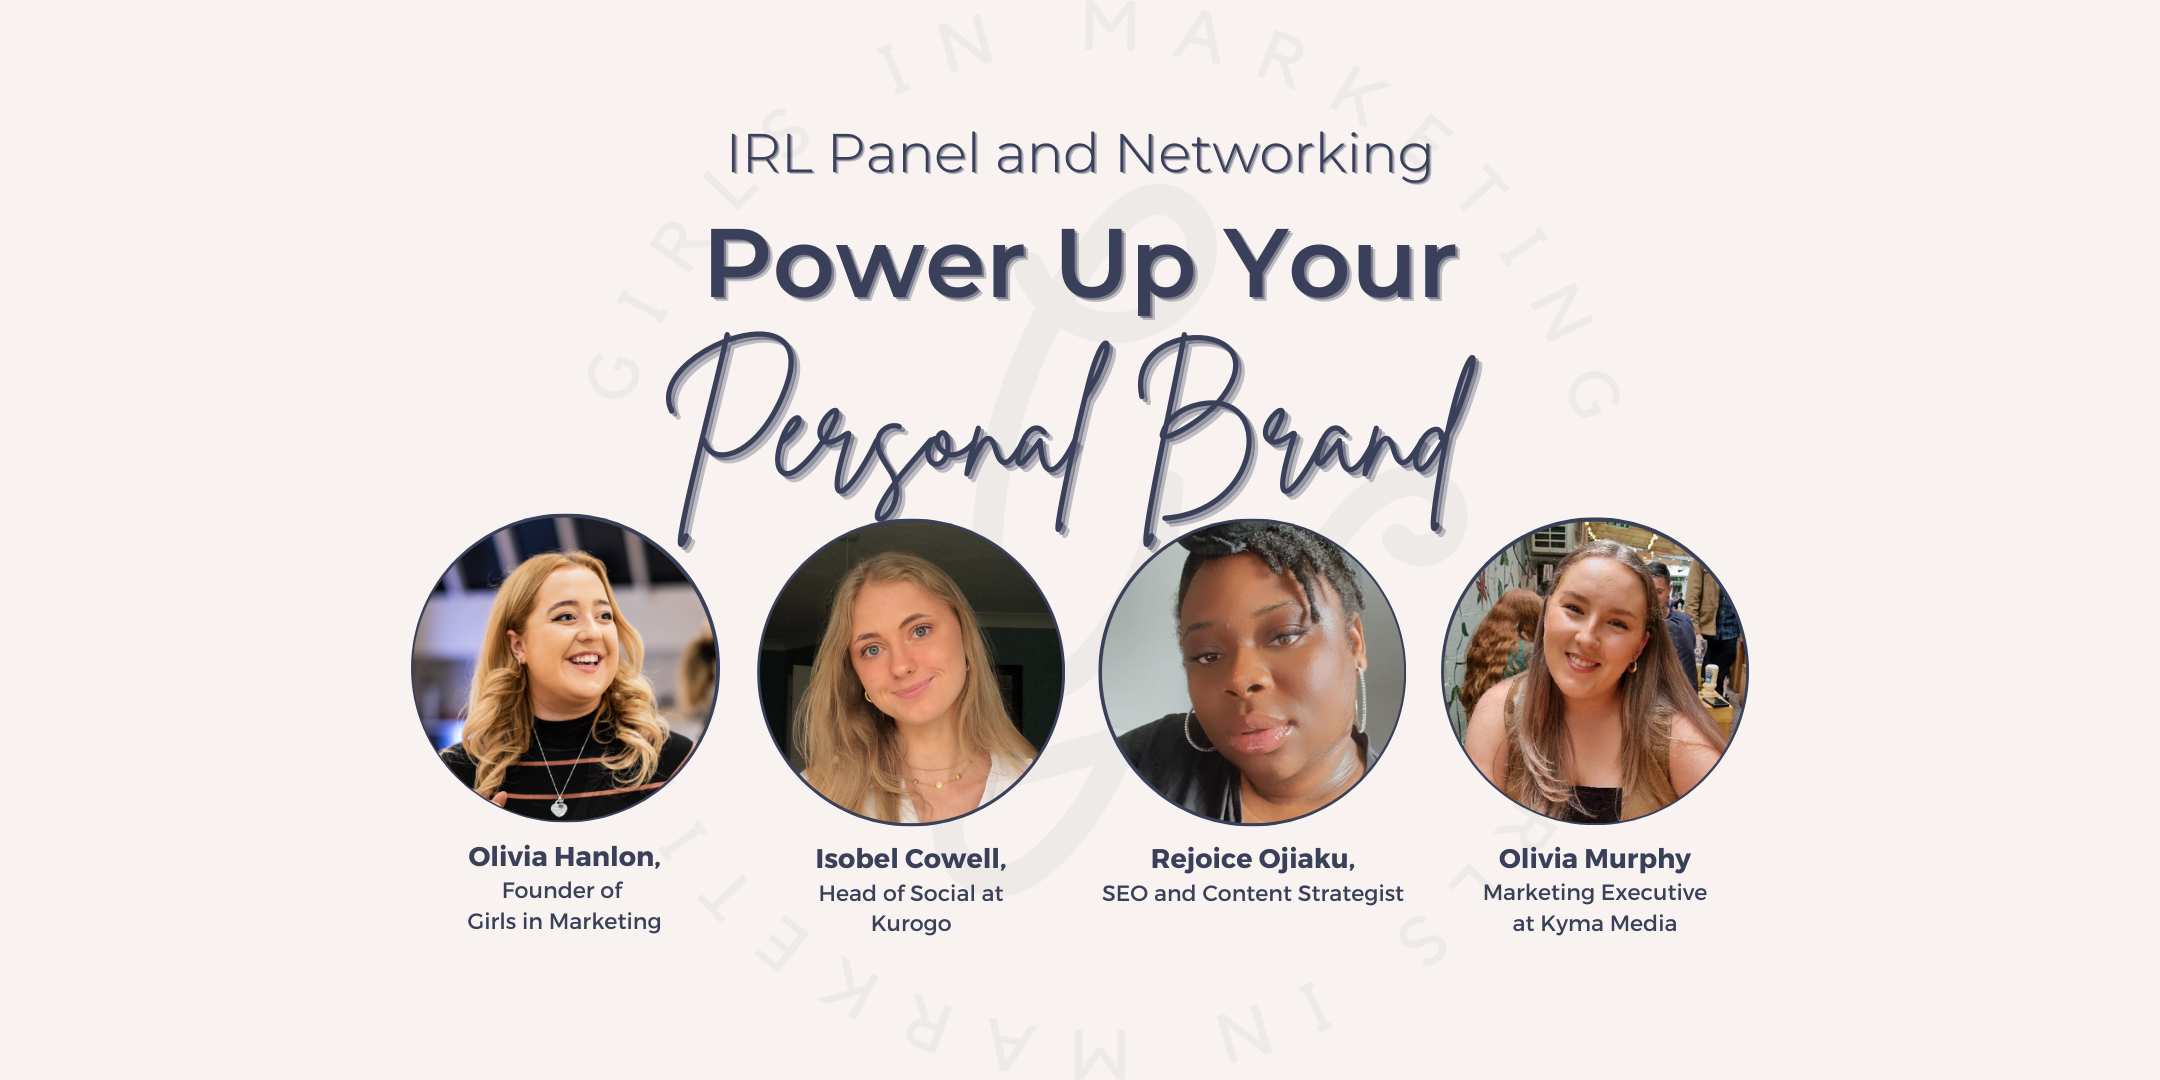 Power Up Your Personal Brand: IRL Panel + Networking